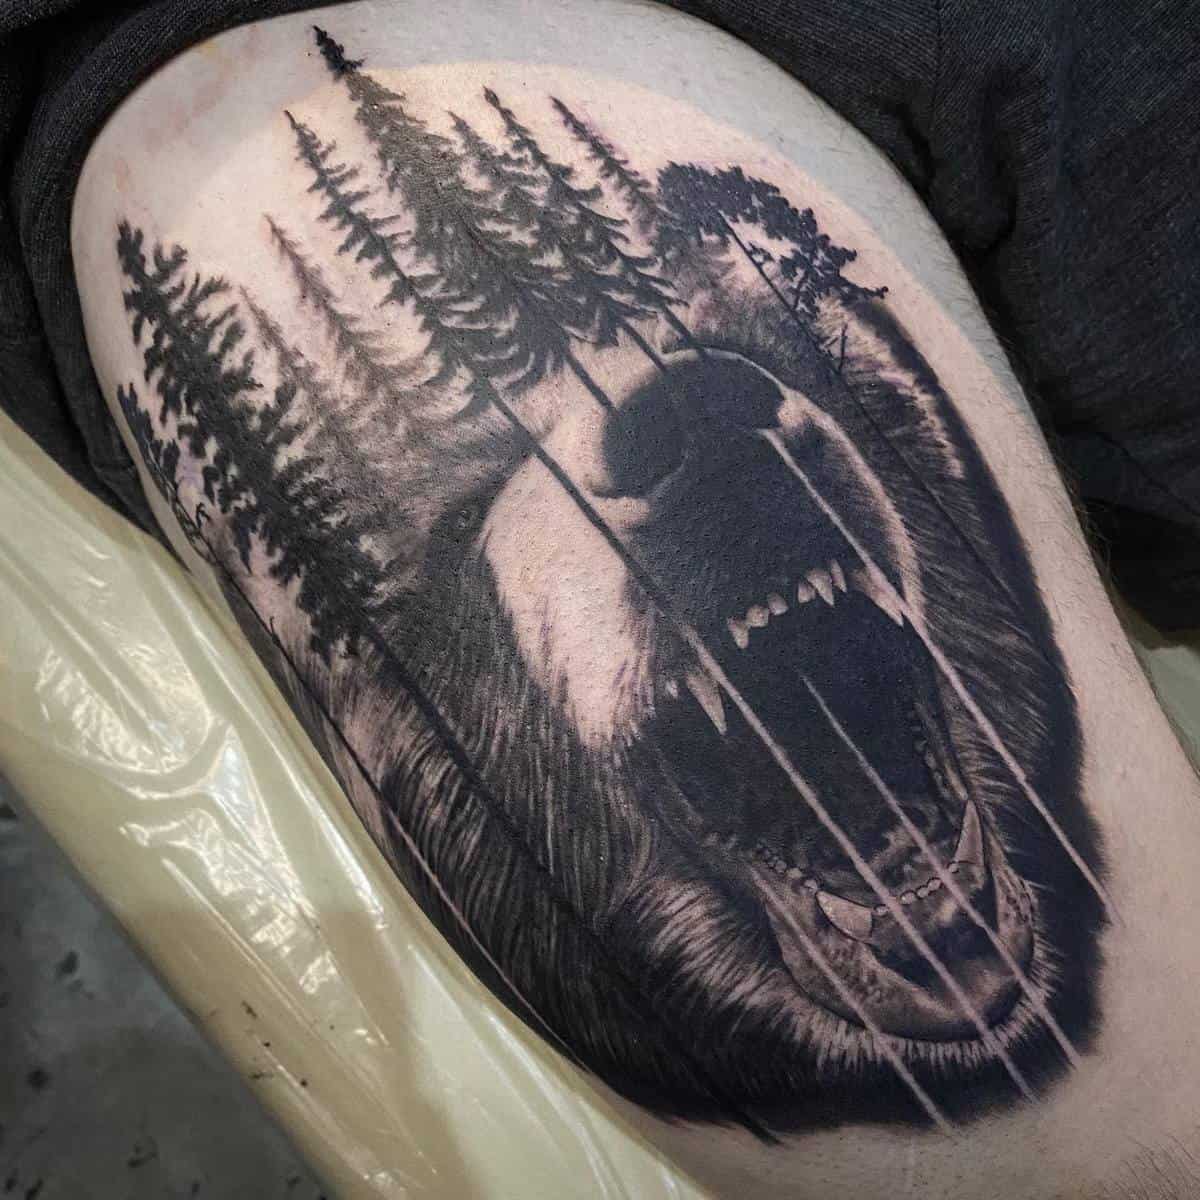 Black and Grey Realism Bear Forest Tattoo - Love n Hate